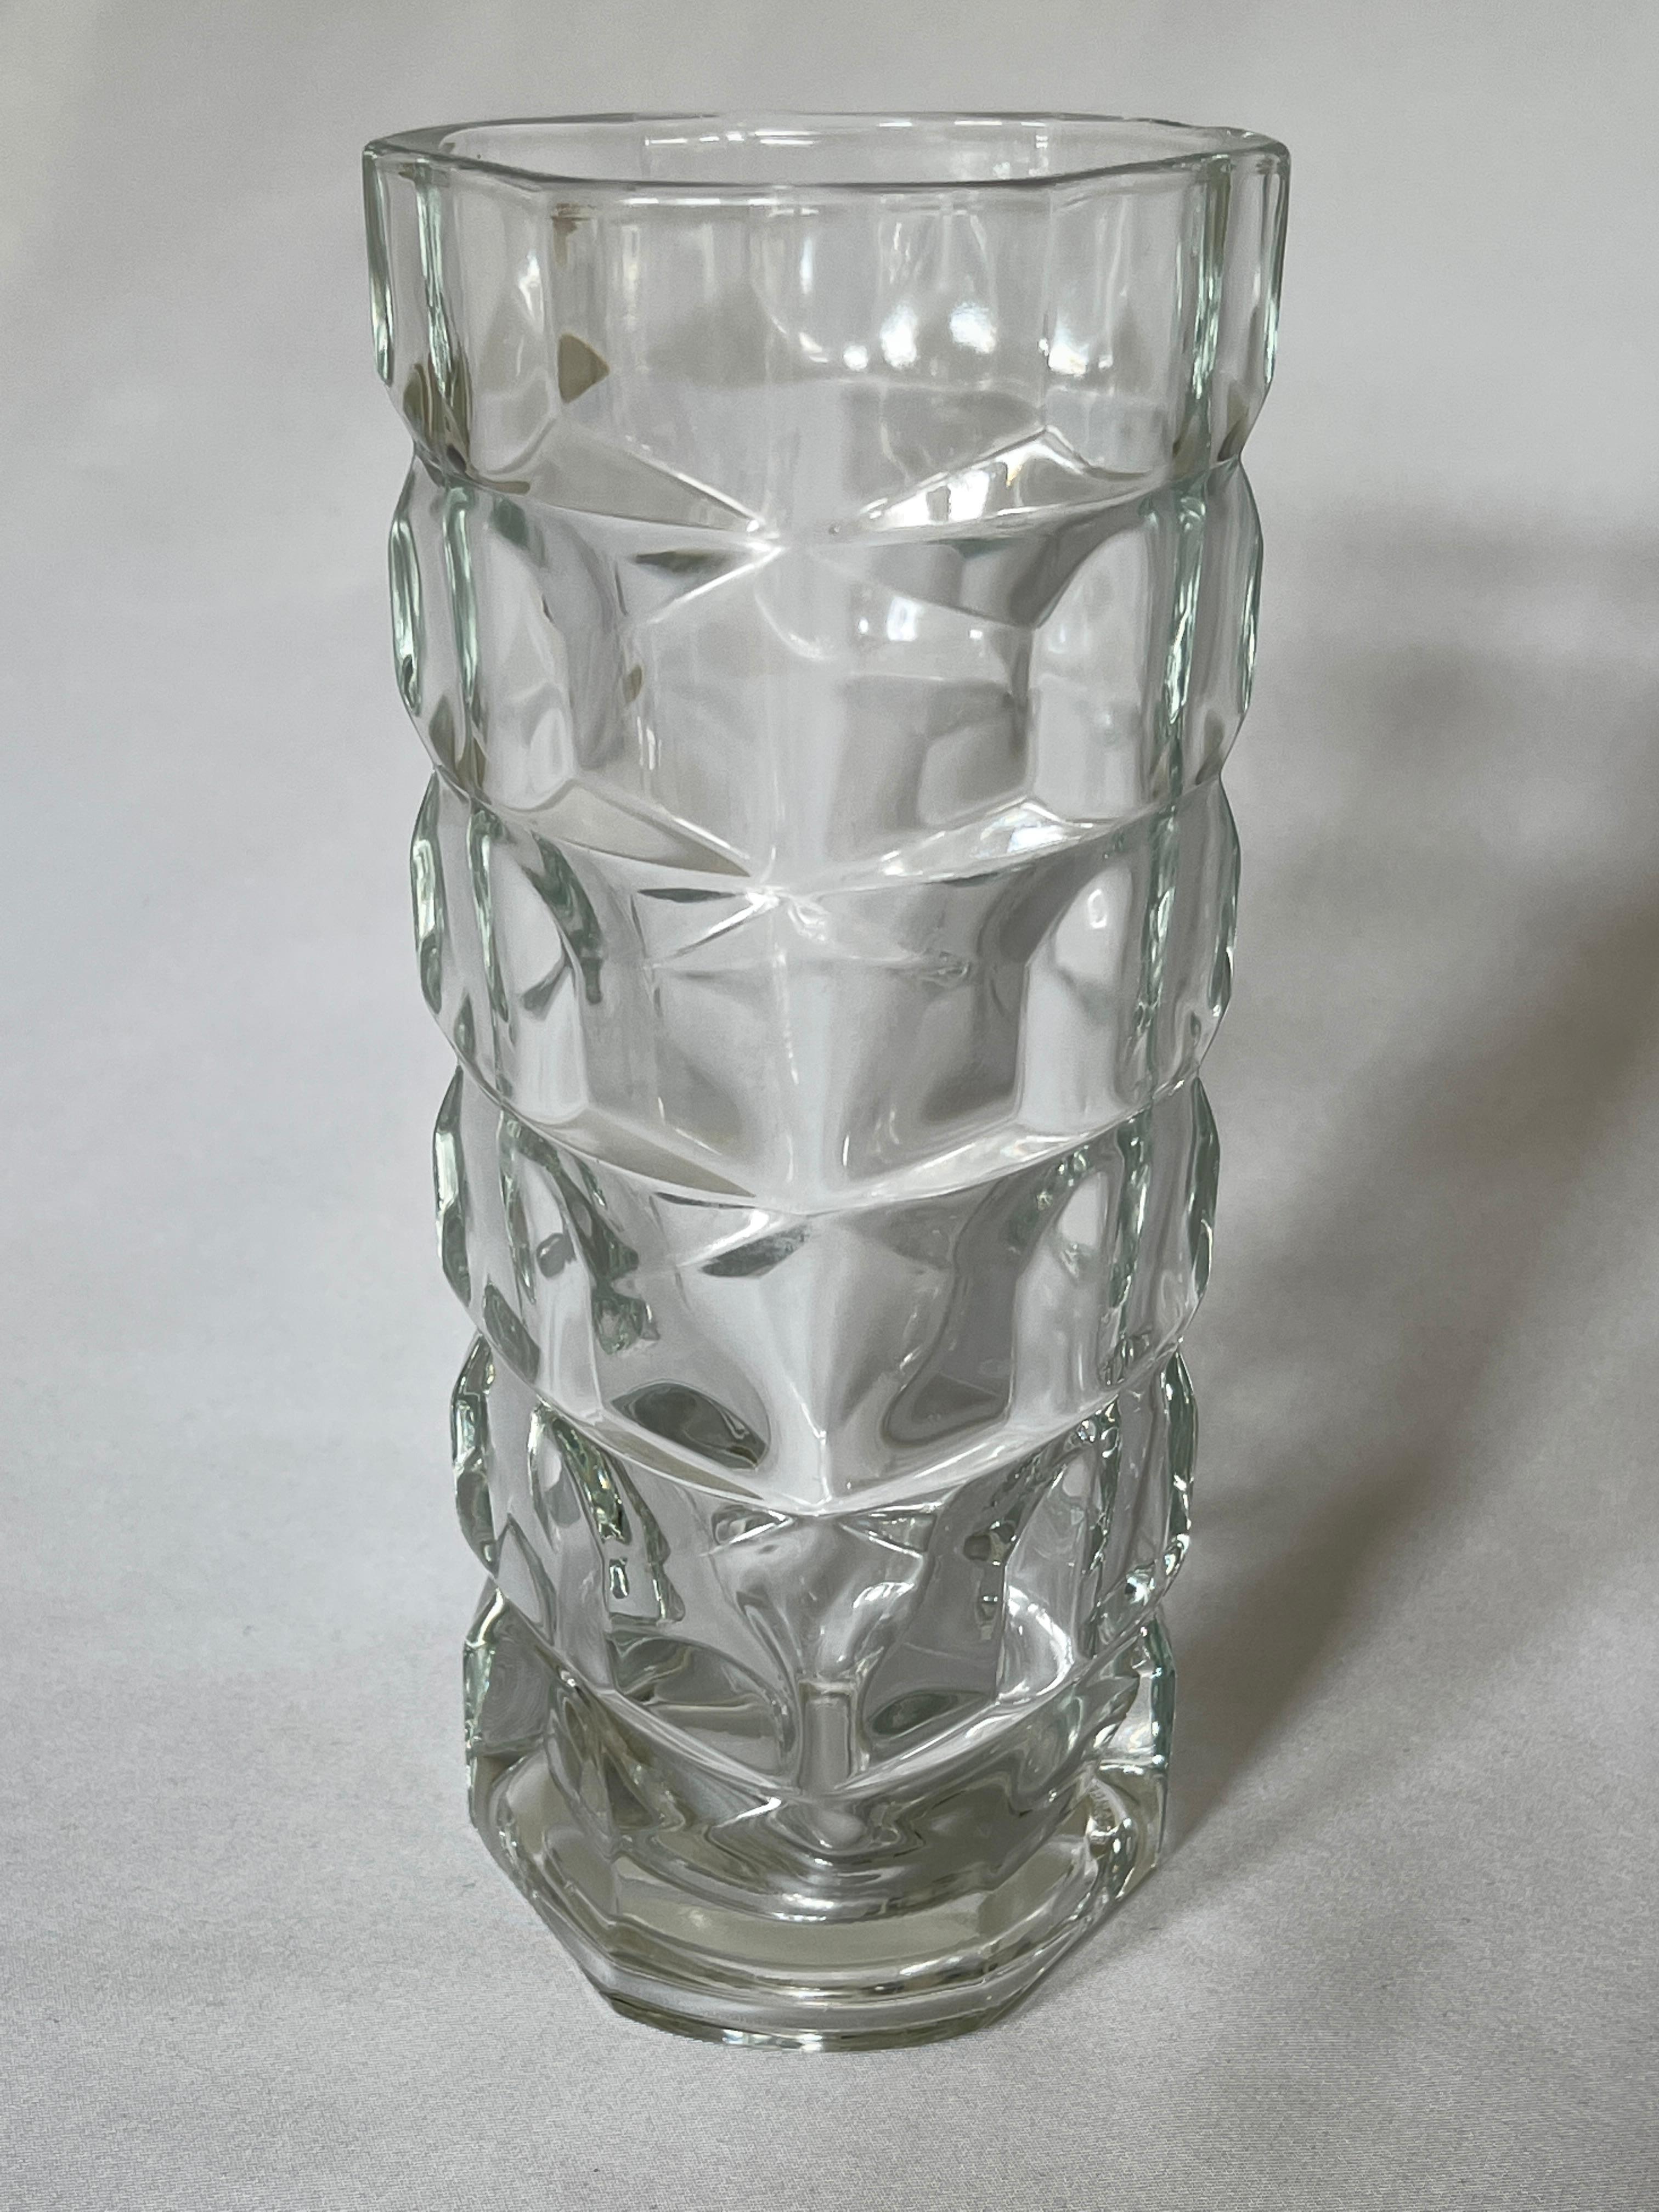 Beautiful geometric shaped three sided clear pressed glass vase with
wonderful heavy weight, reflects the light brilliantly.
 Signed France on bottom, c. 1970's.
  